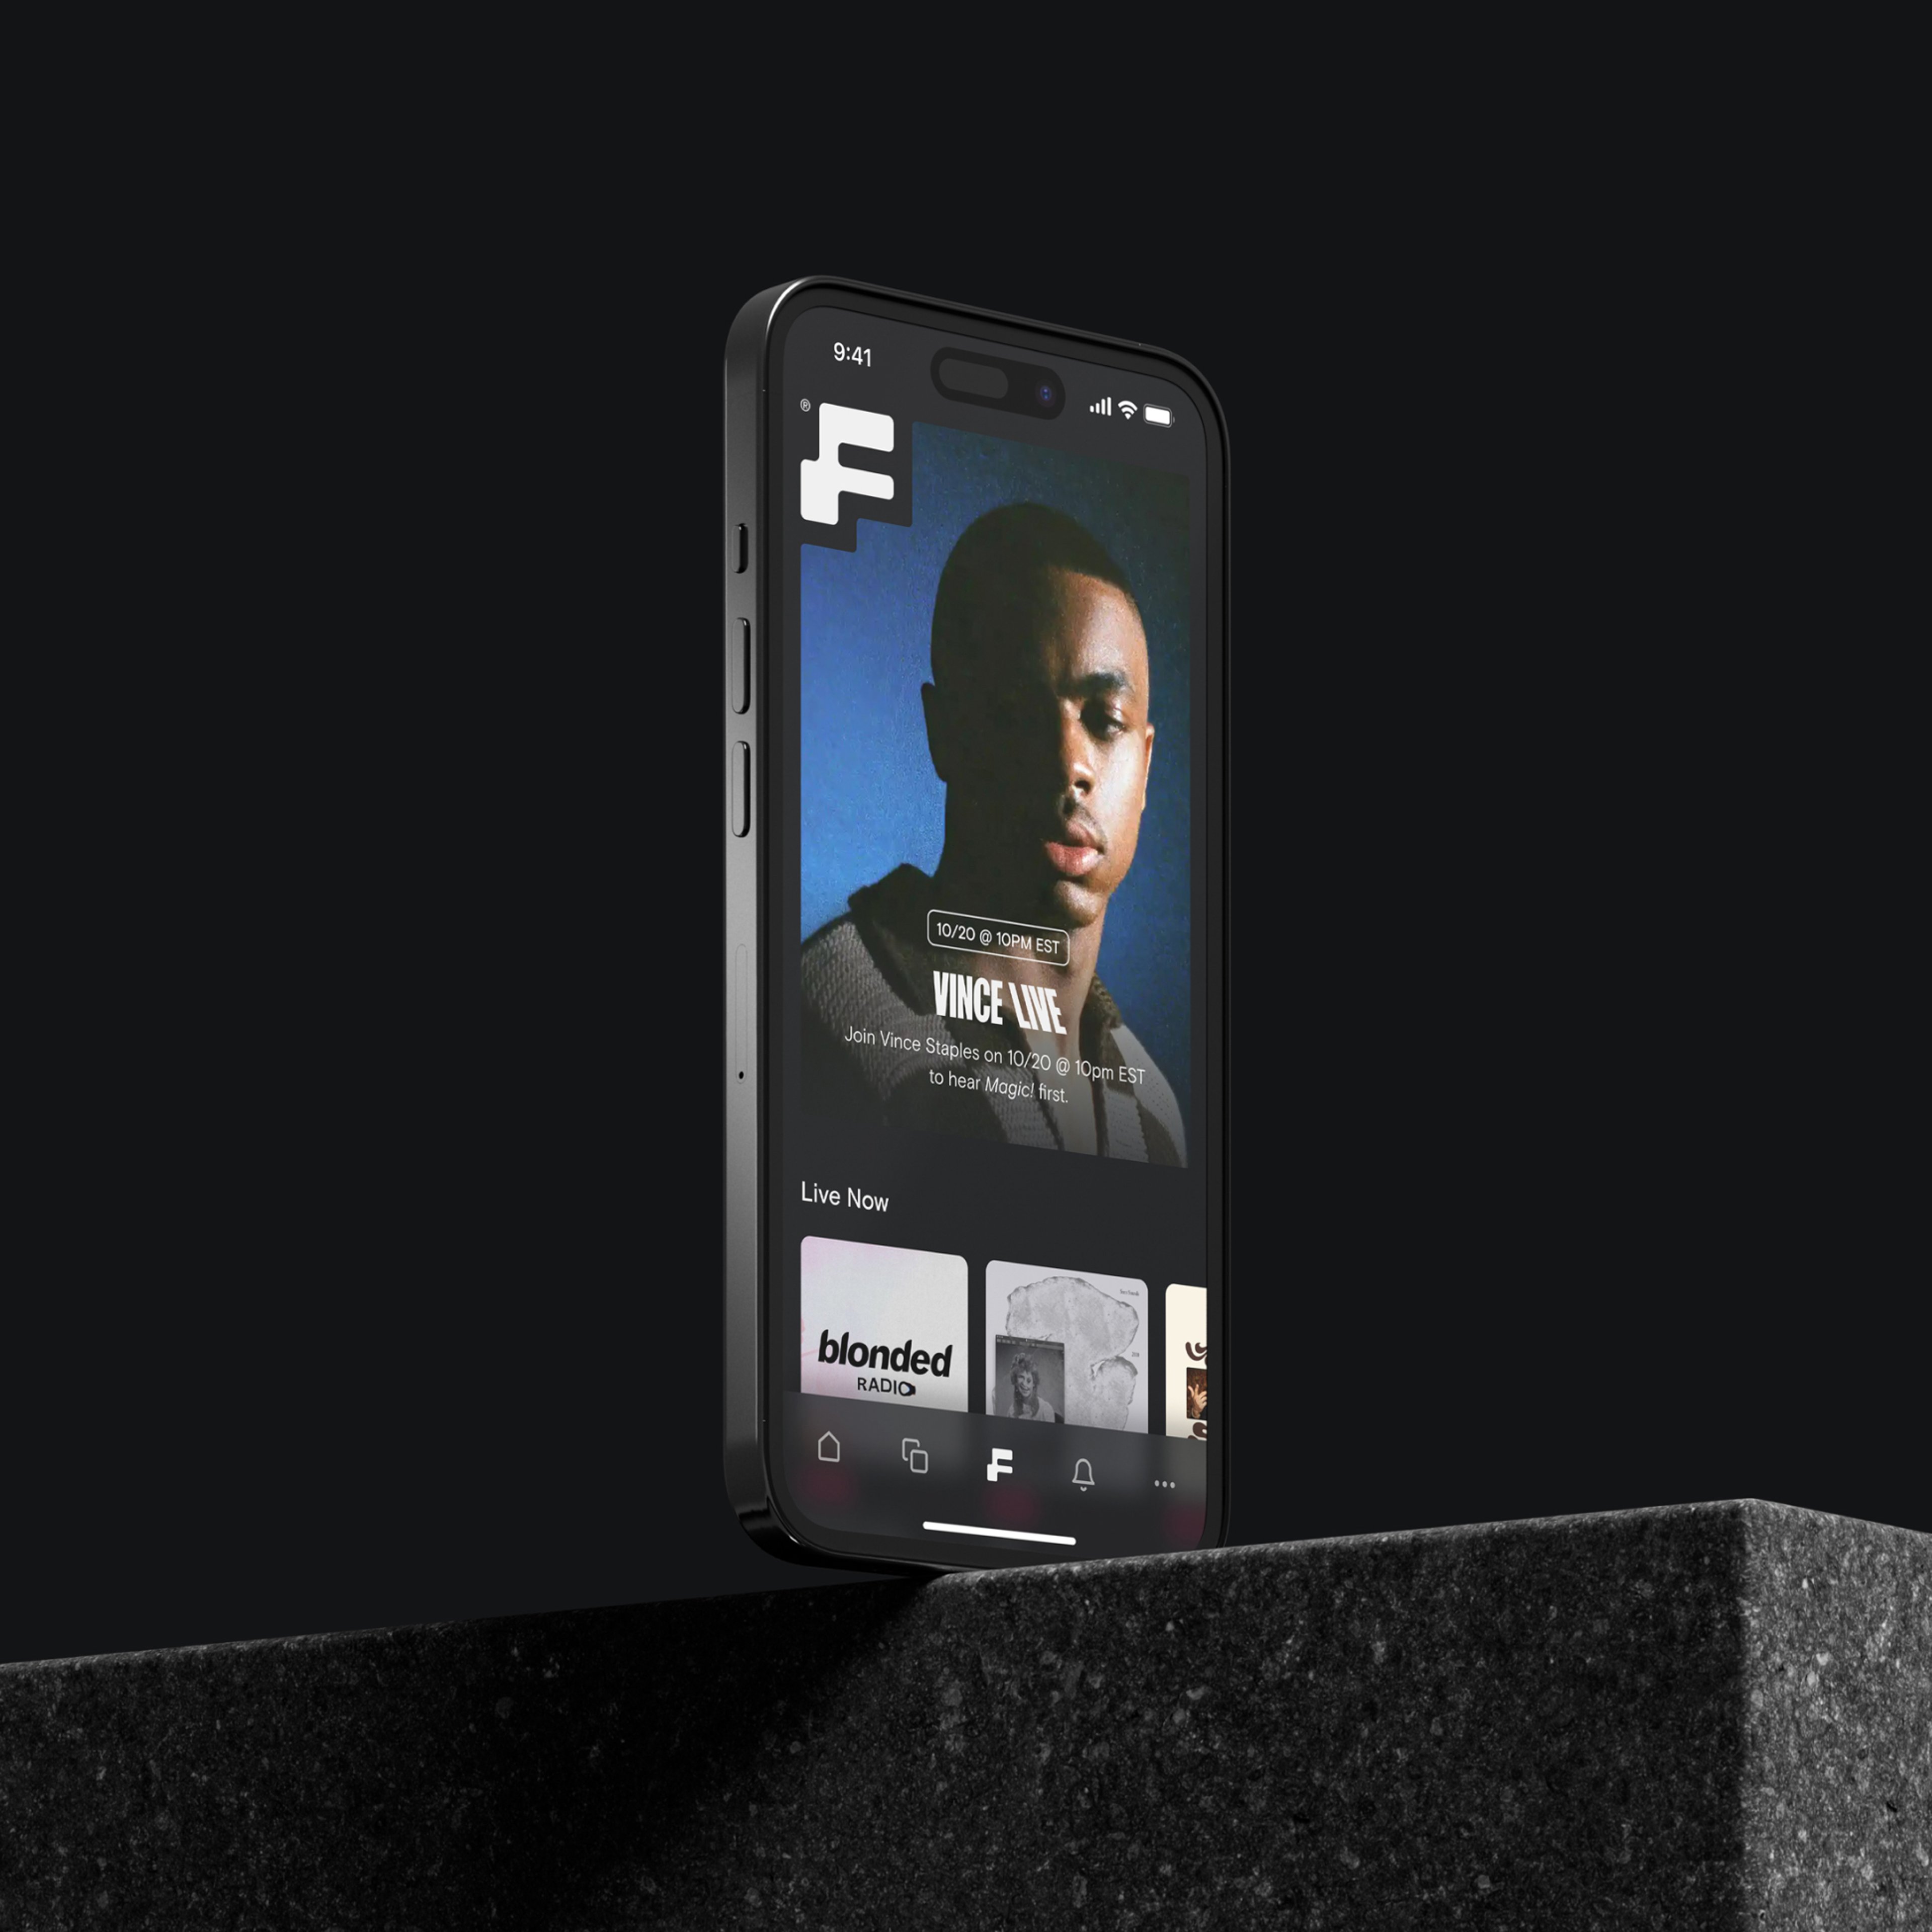 Image of an iPhone on a concrete block showing the Found music streaming app